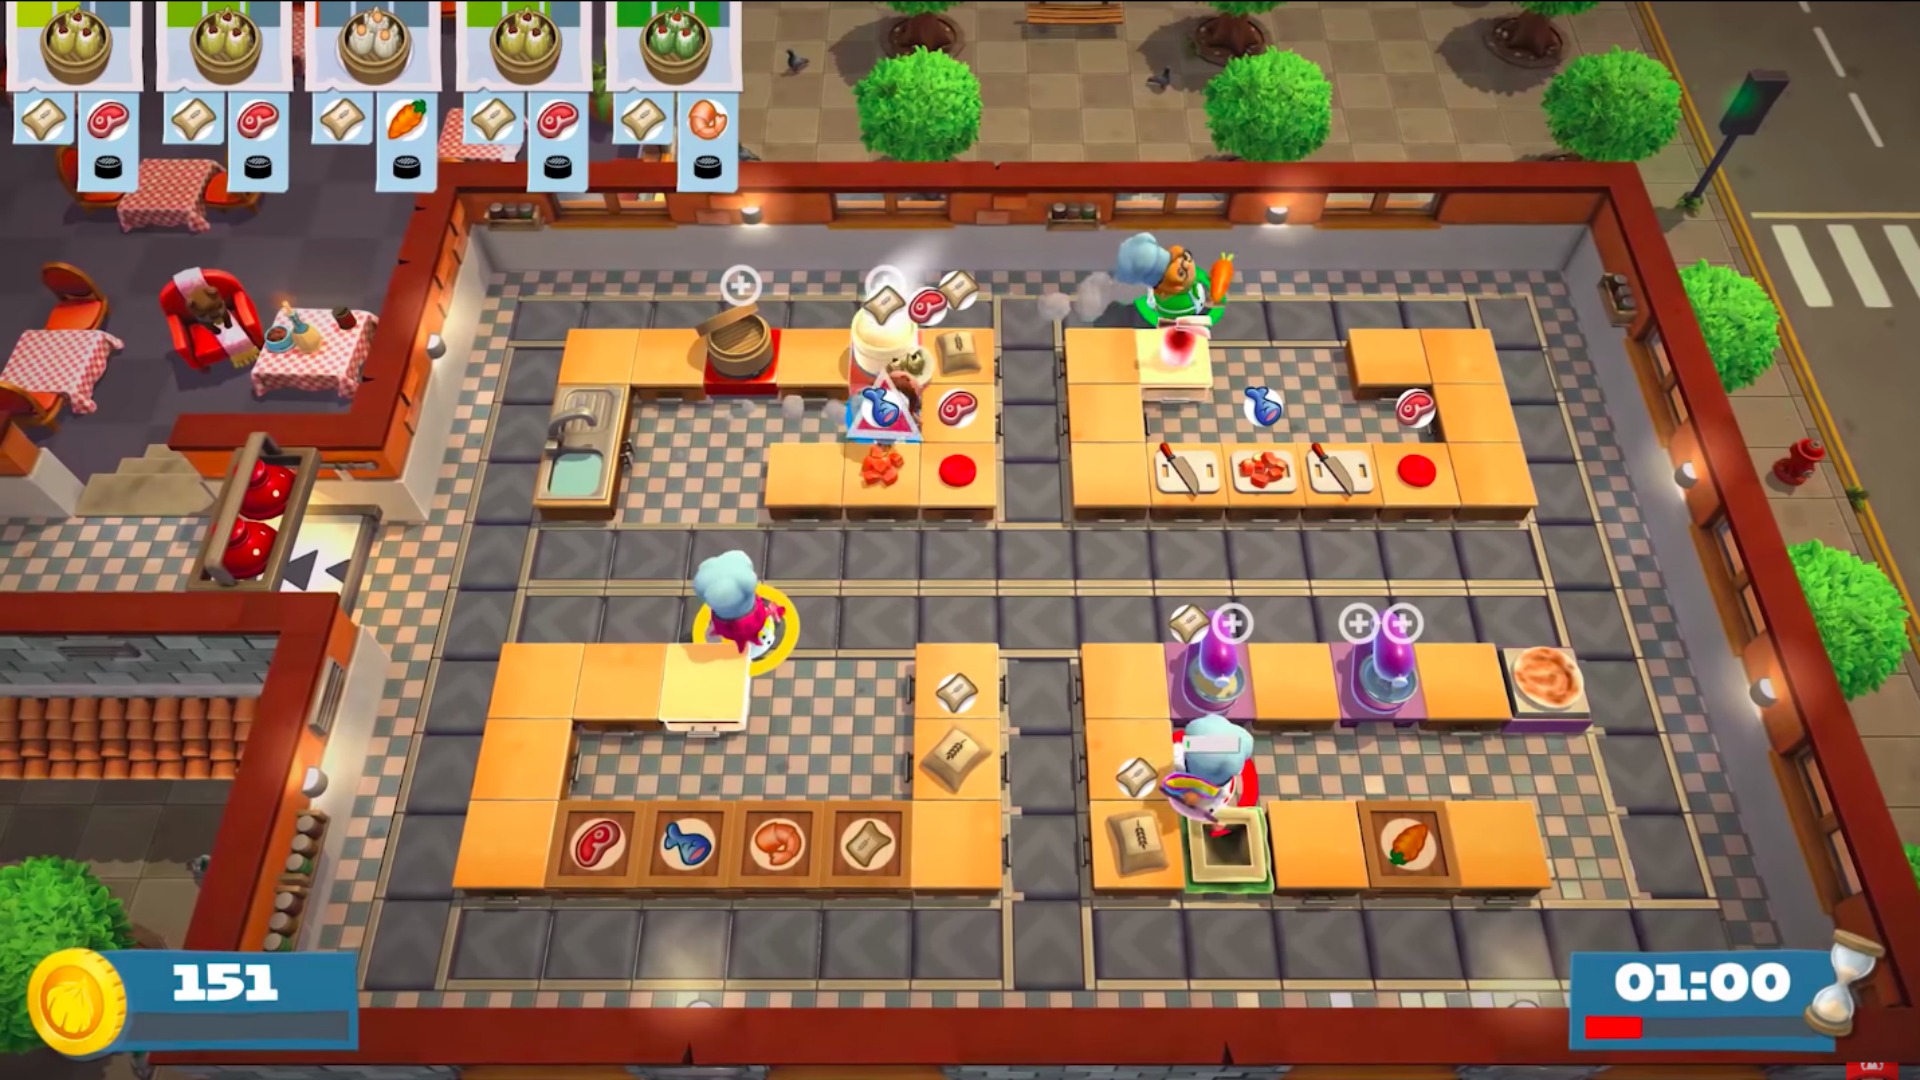 overcooked 2 switch